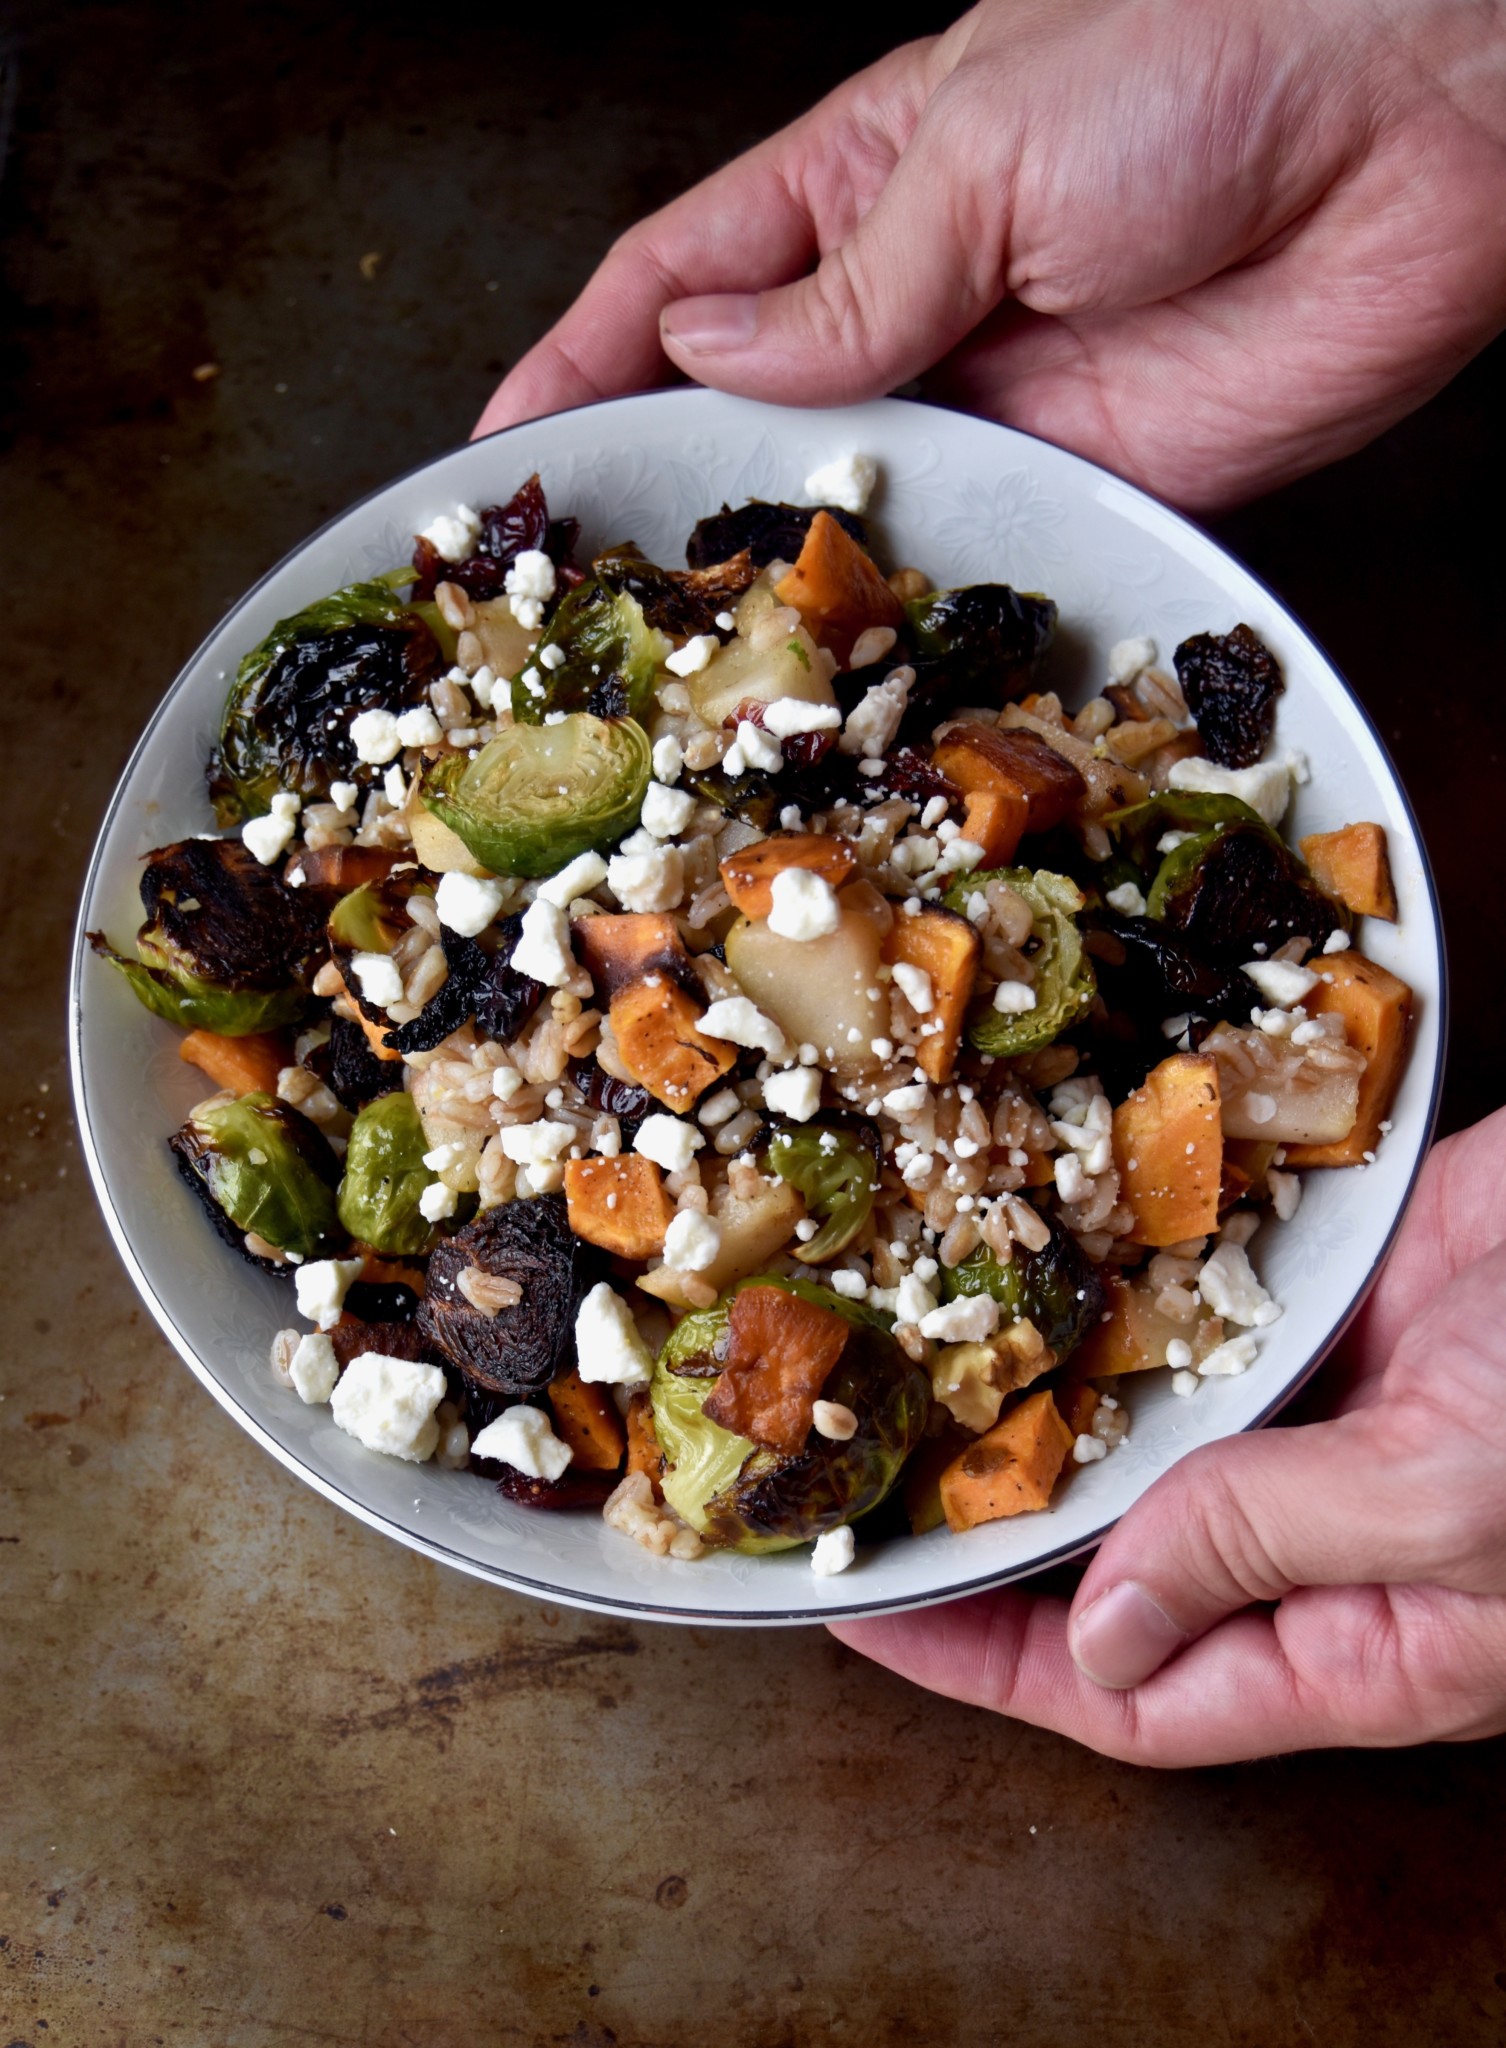 roasted harvest vegetable farro & feta bowl - a delicious autumn-inspired meal that comes together quickly and warms the soul // cait's plate